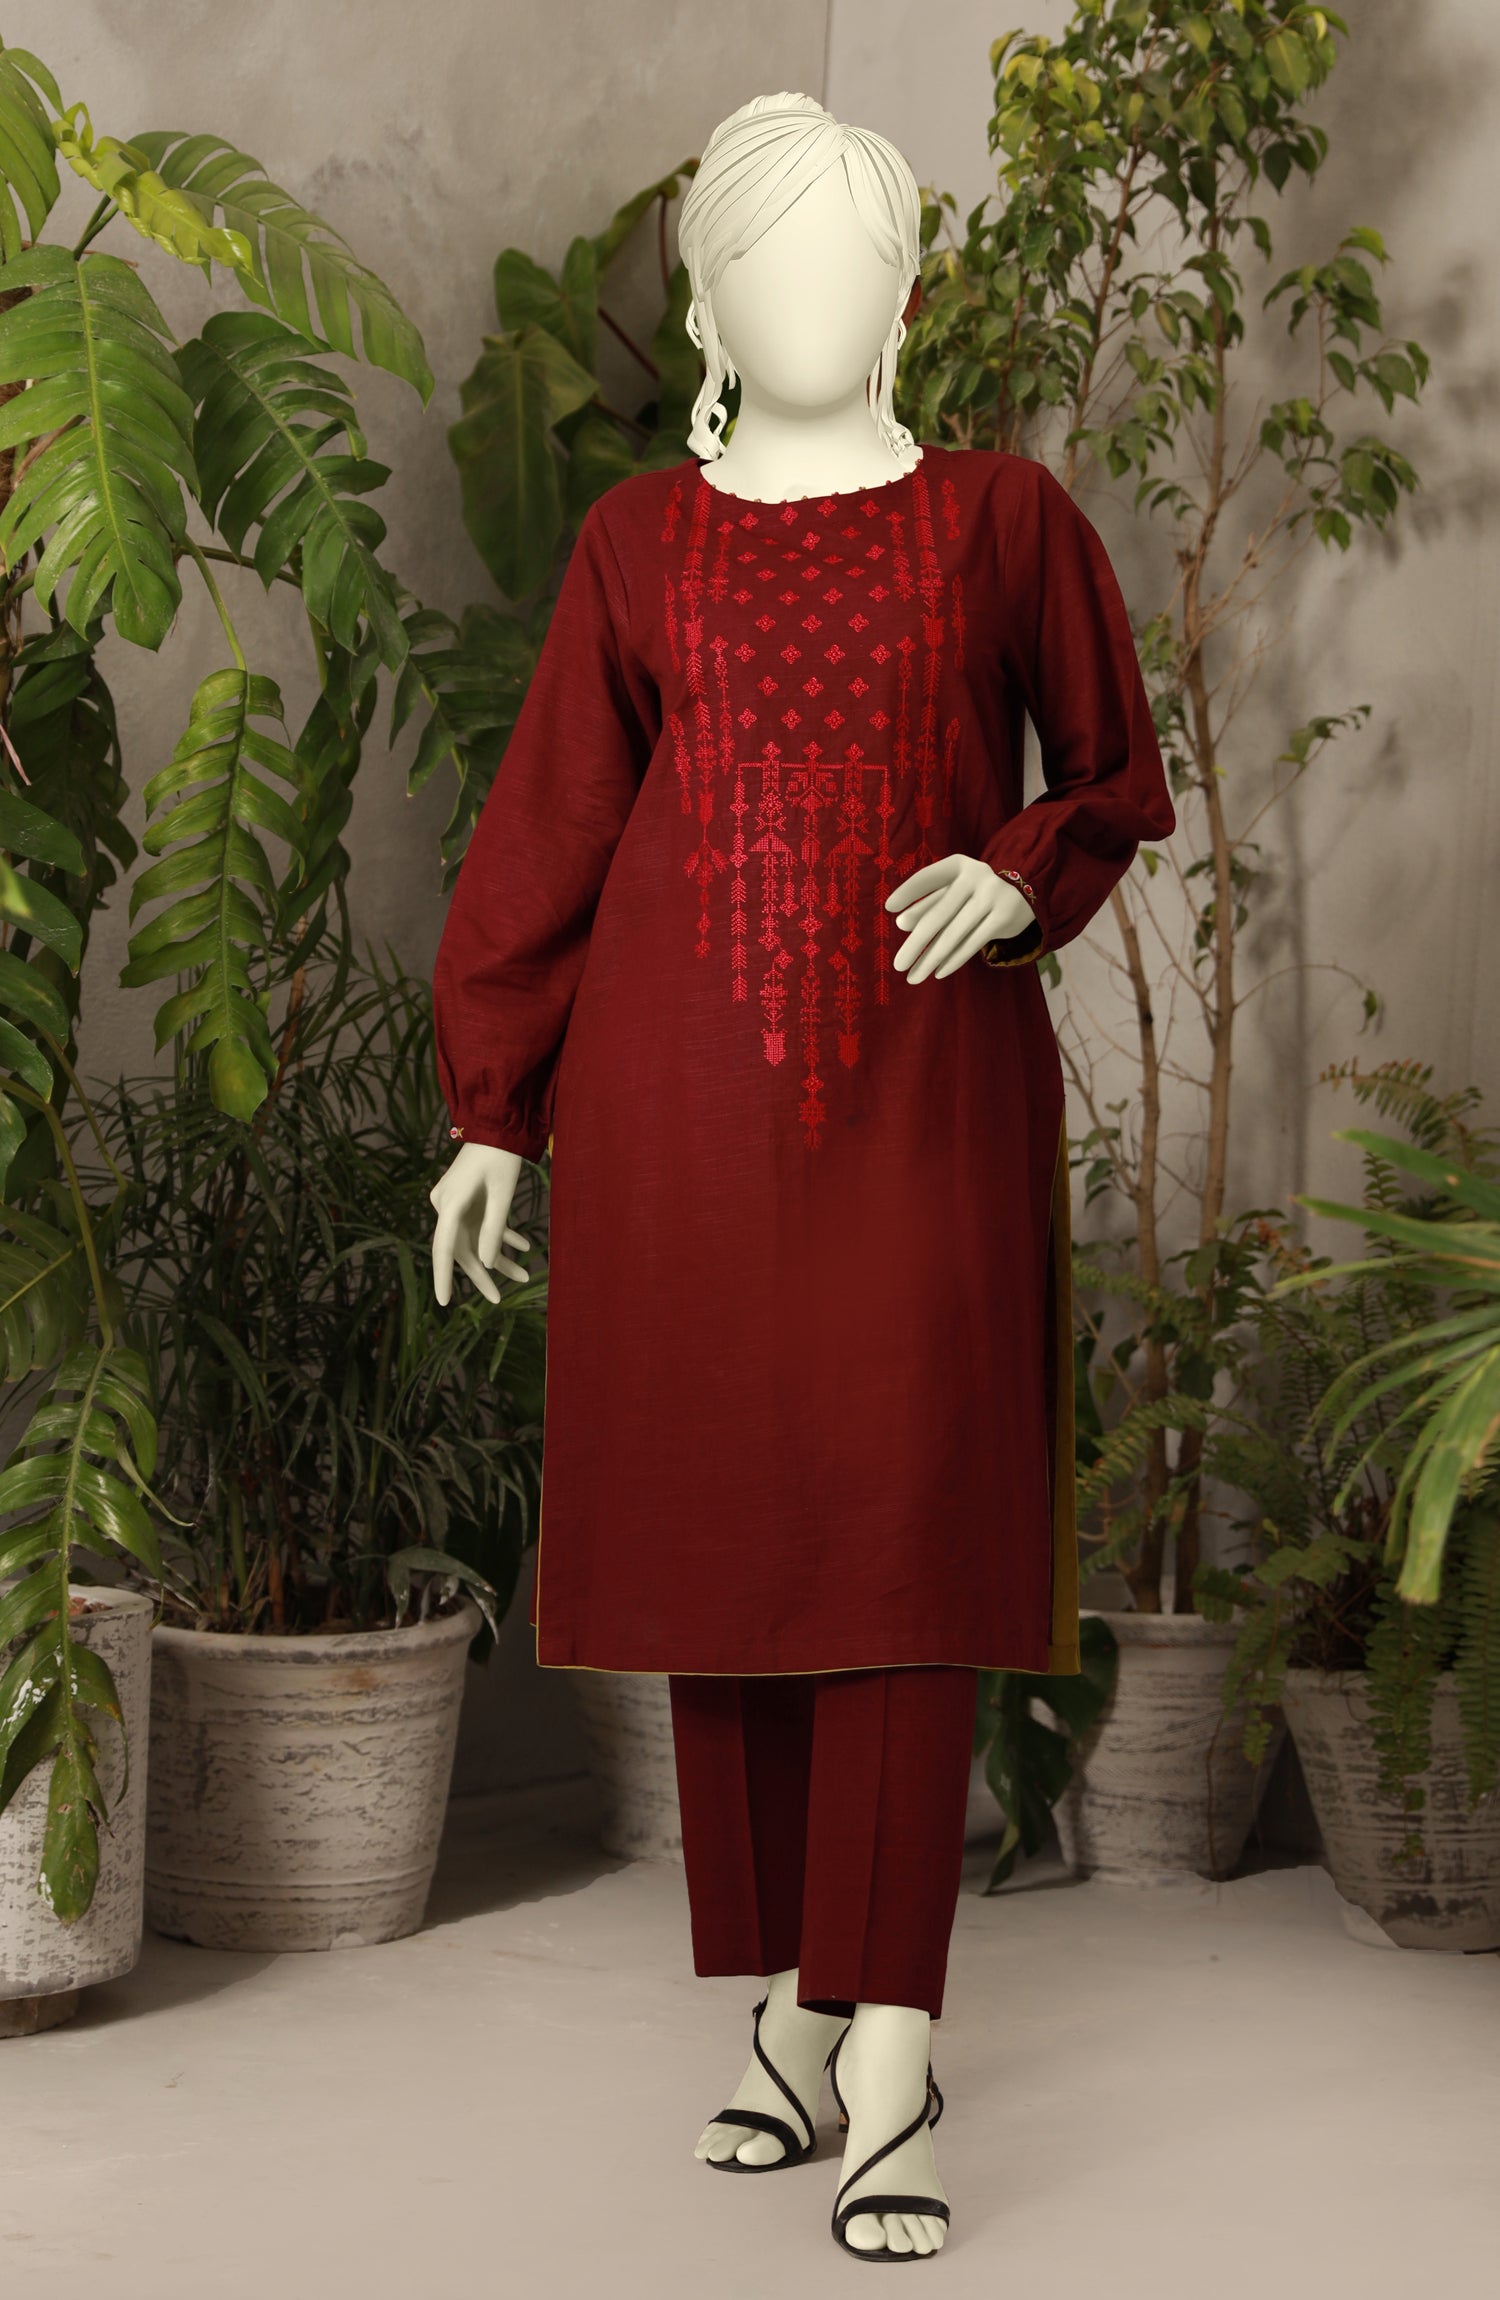 WINTER'22 TUFTING STITCHED 2PC SUIT